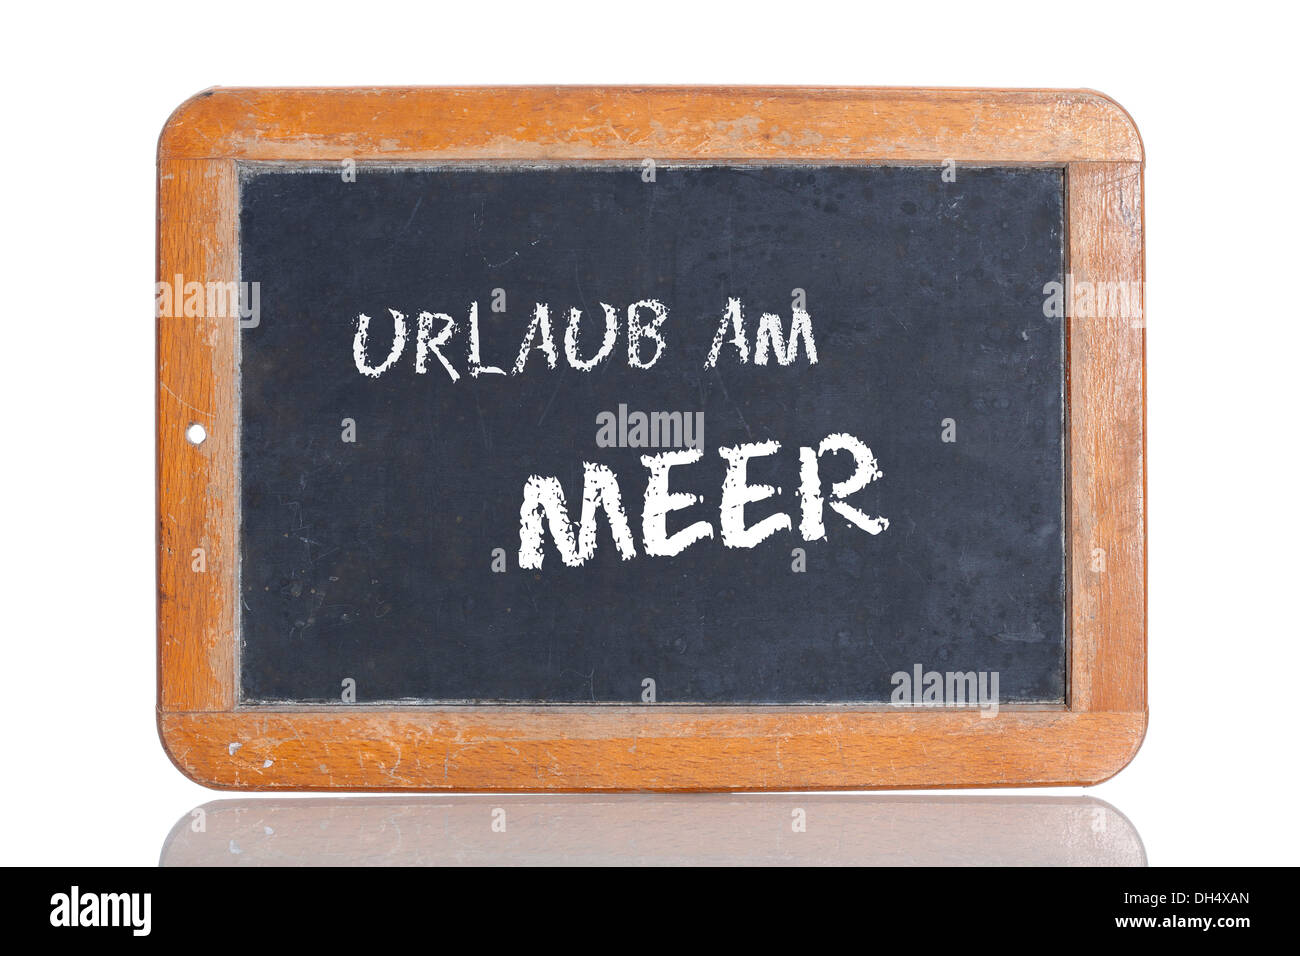 Old chalkboard, lettering 'URLAUB AM MEER', German for 'A HOLIDAY AT THE SEASIDE' Stock Photo